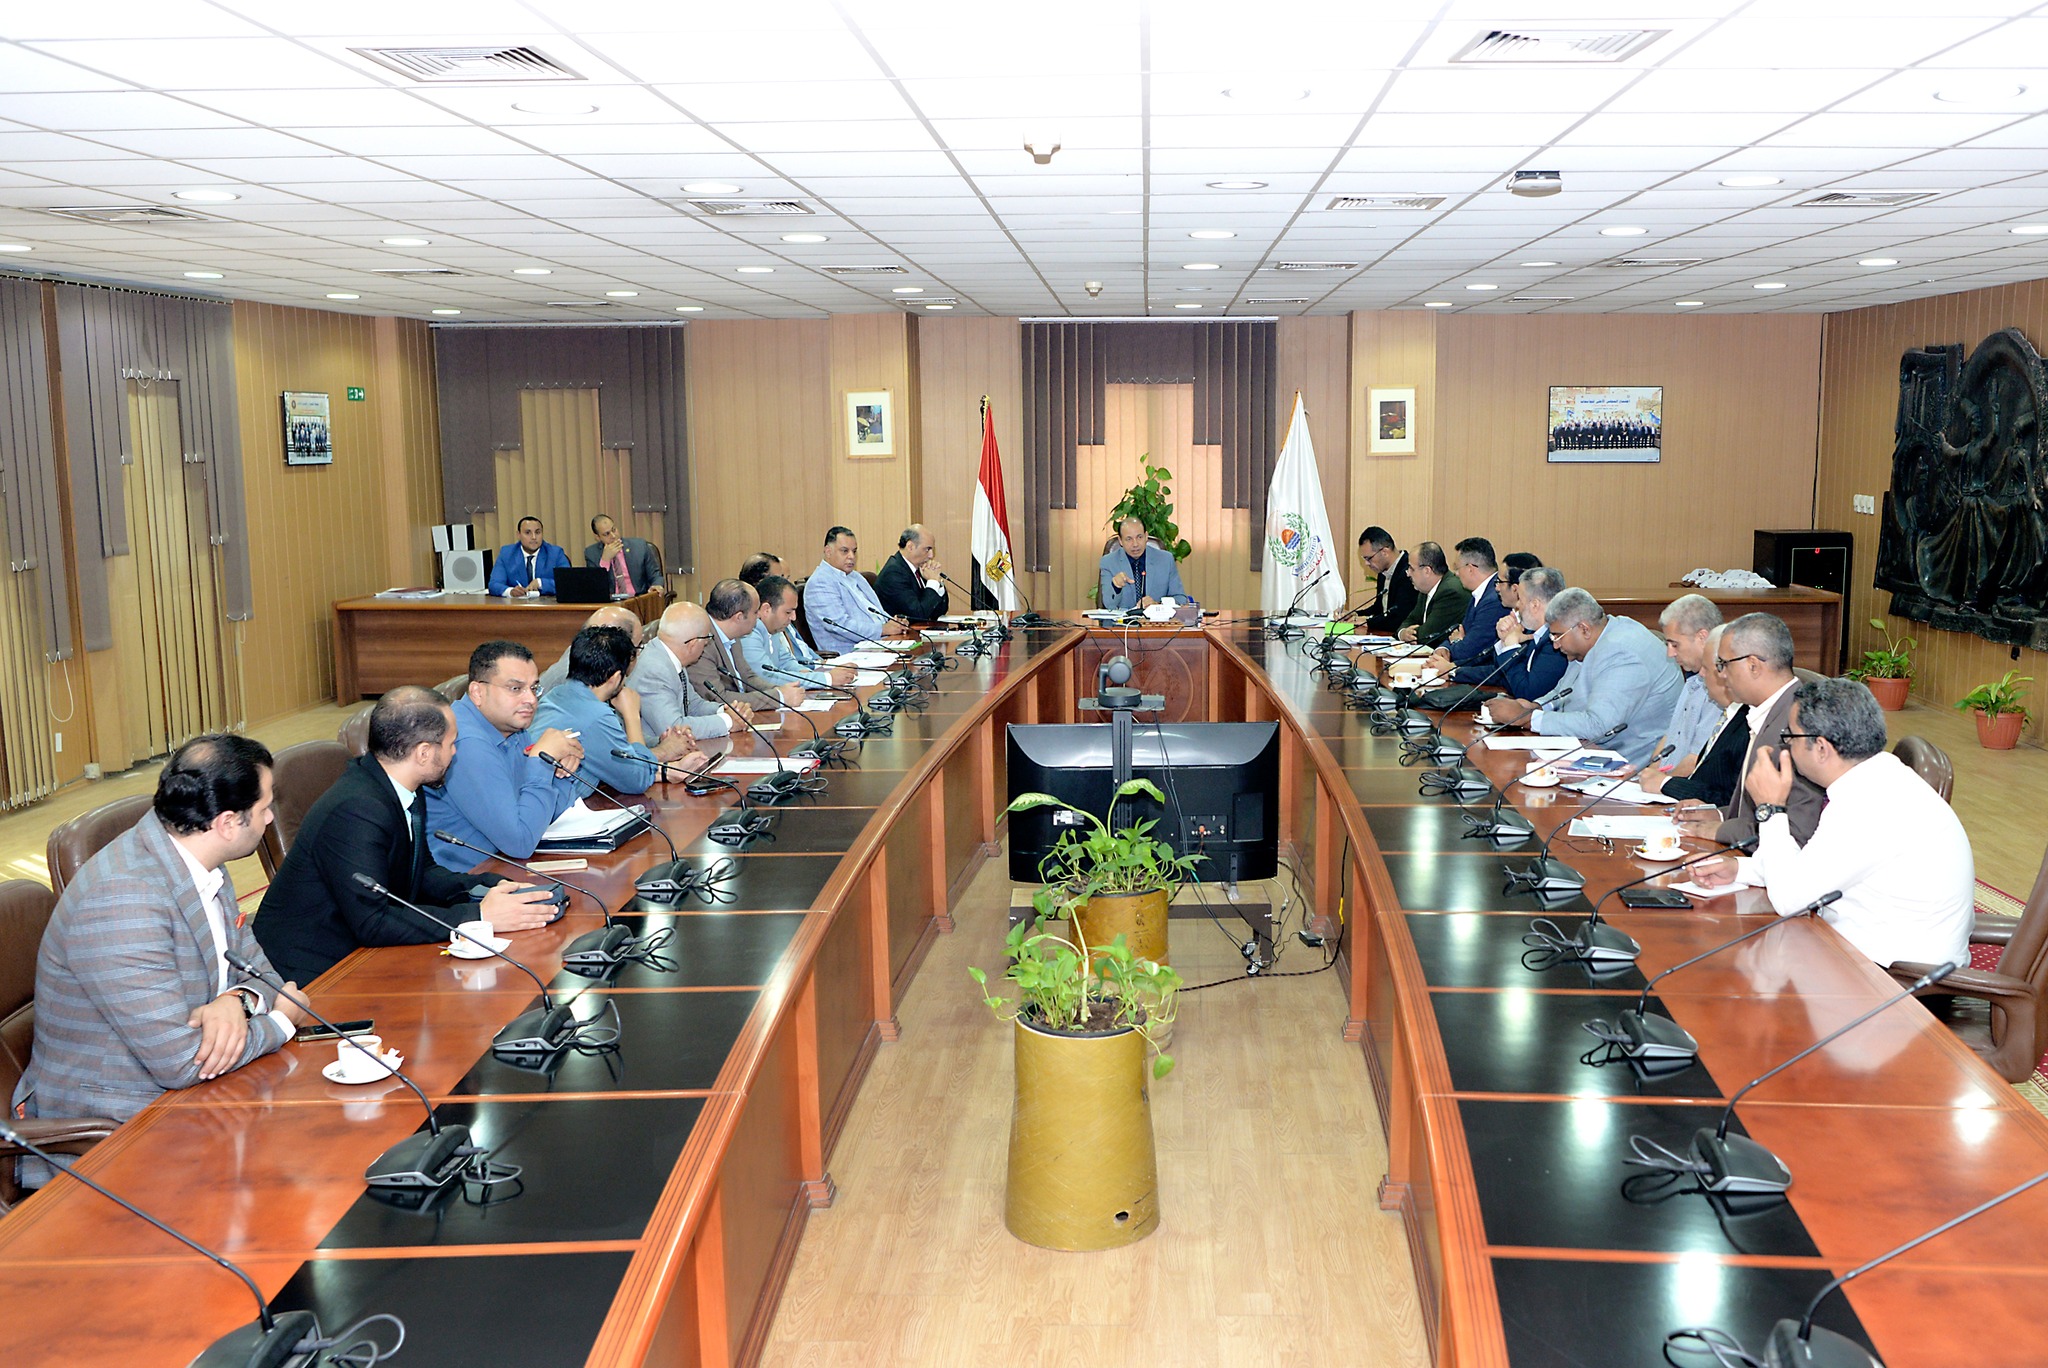 The President of Mansoura University discusses the development of the electronic reservation system for outpatient clinics in hospitals and medical centers via the Internet